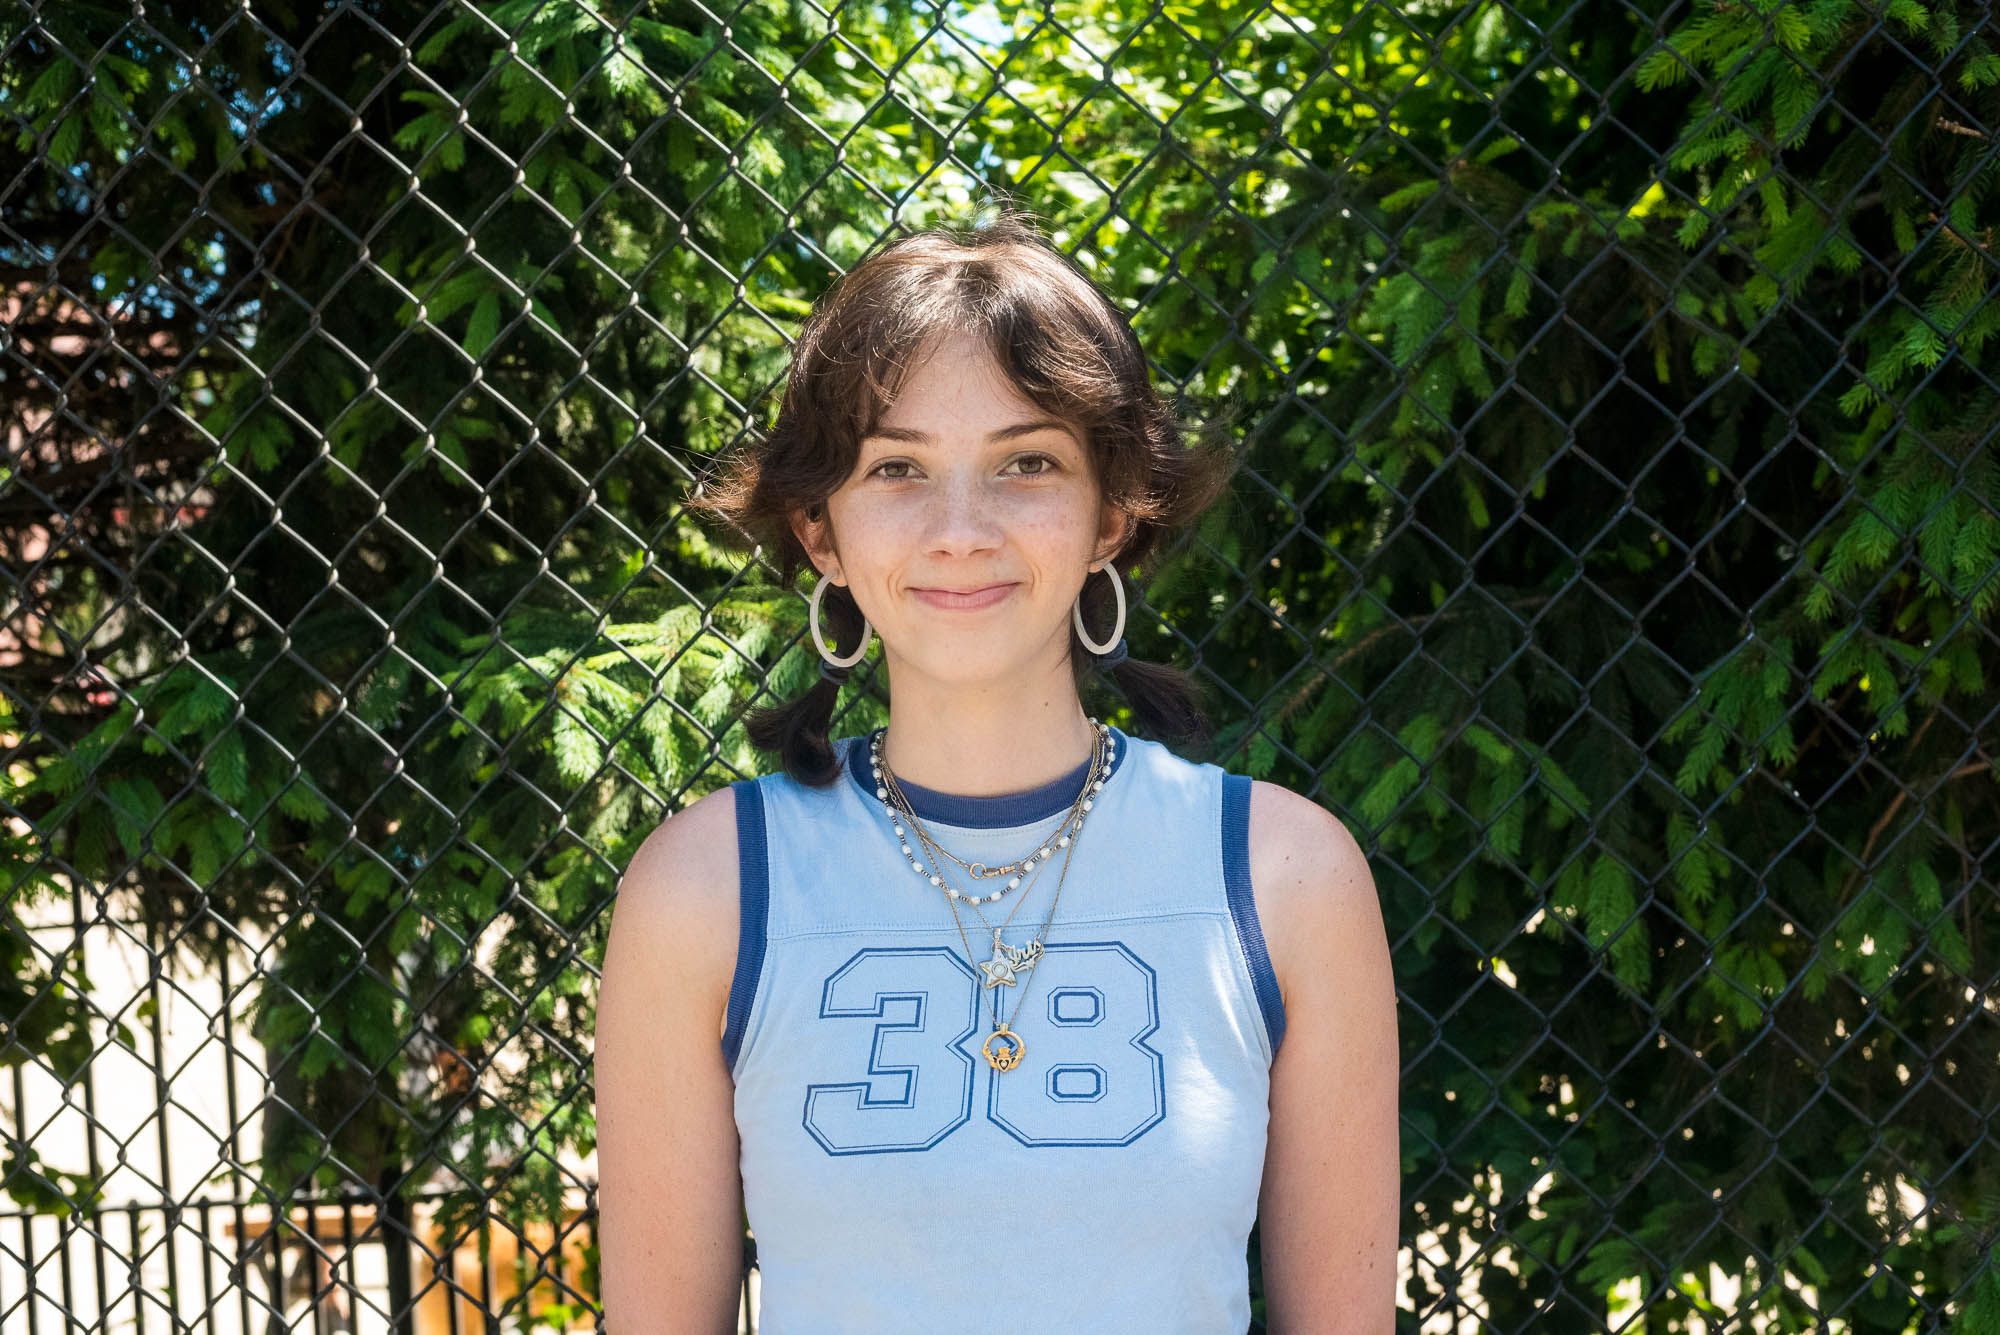 Erwin wearing a light blue tank with the number 38 on it, white hoop earrings, and several necklaces. 